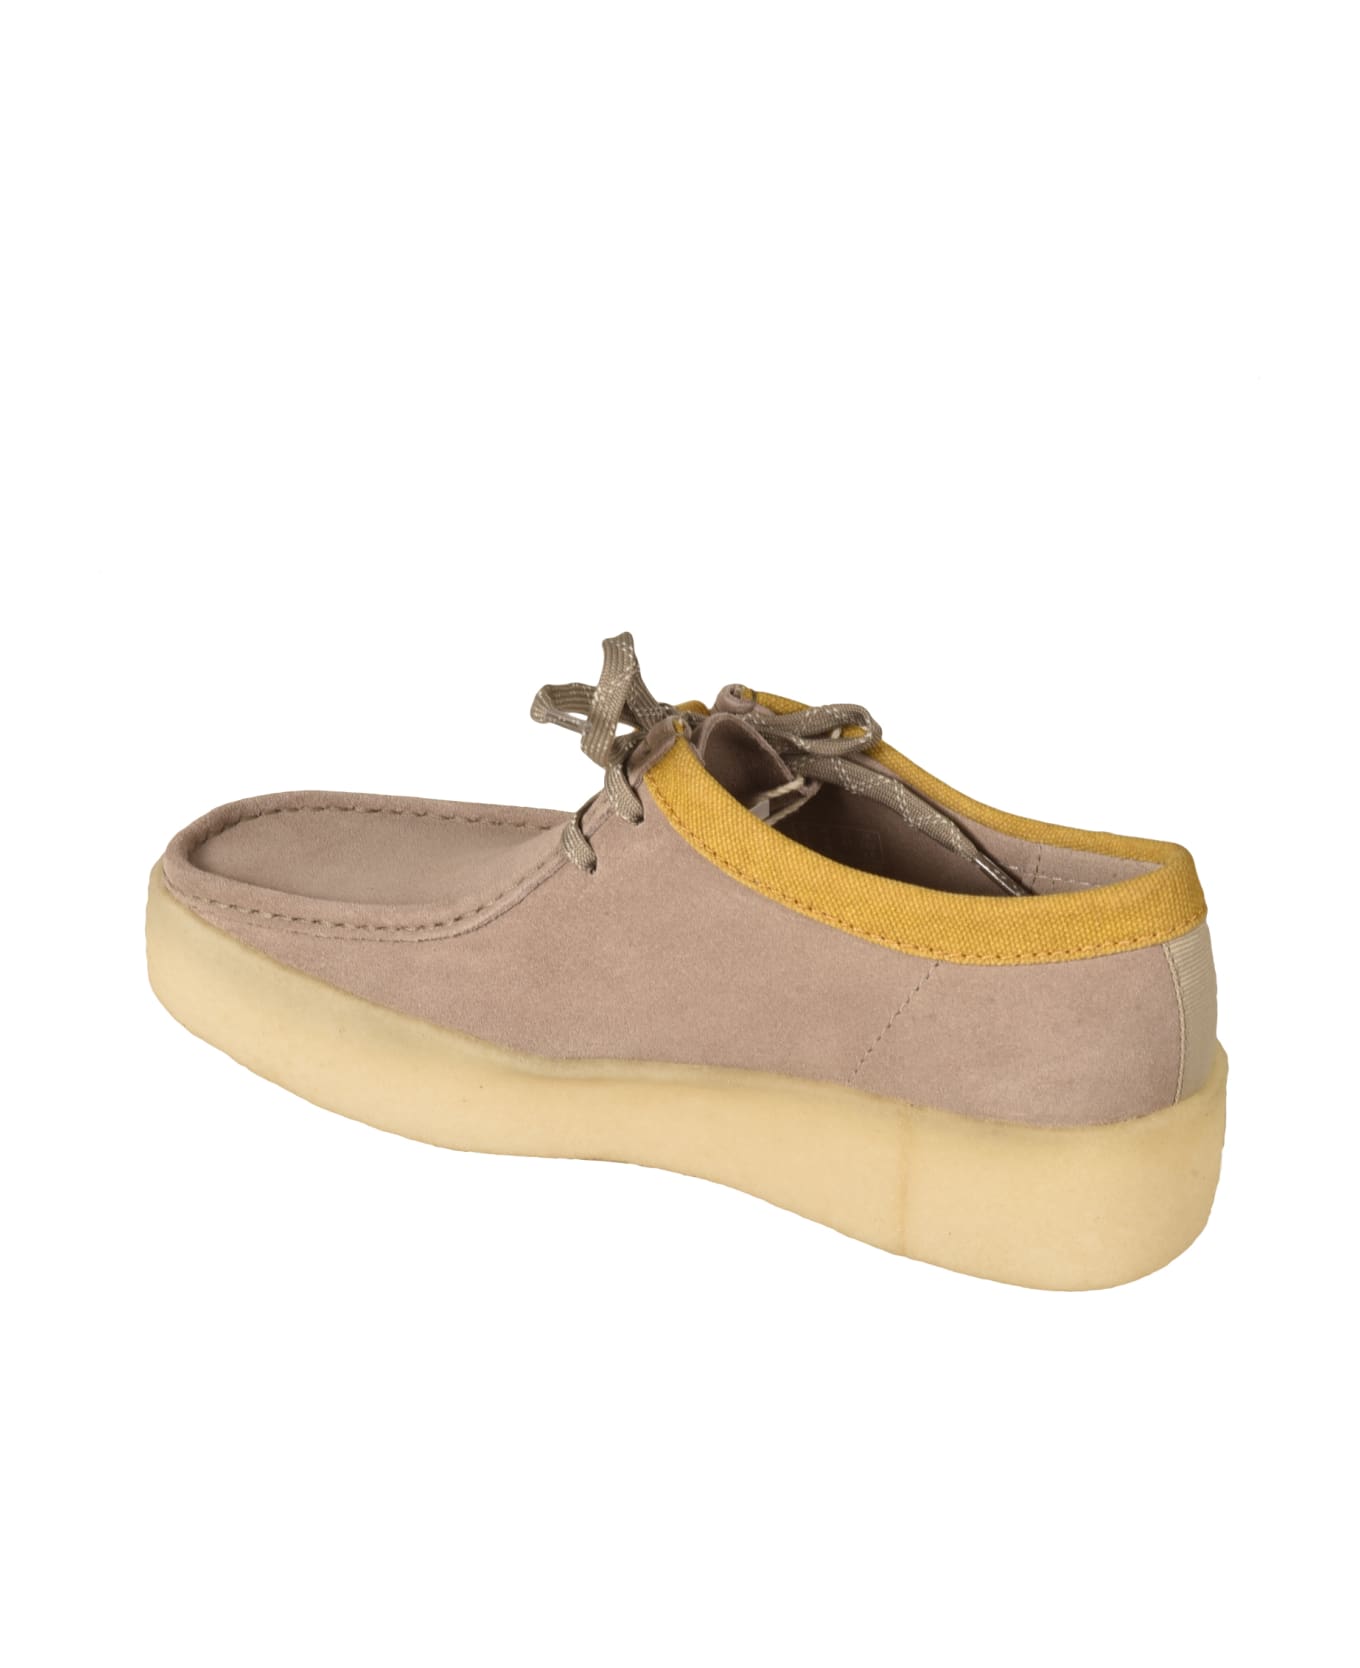 Clarks Wallabee Cup Ankle Boots - Stone ブーツ